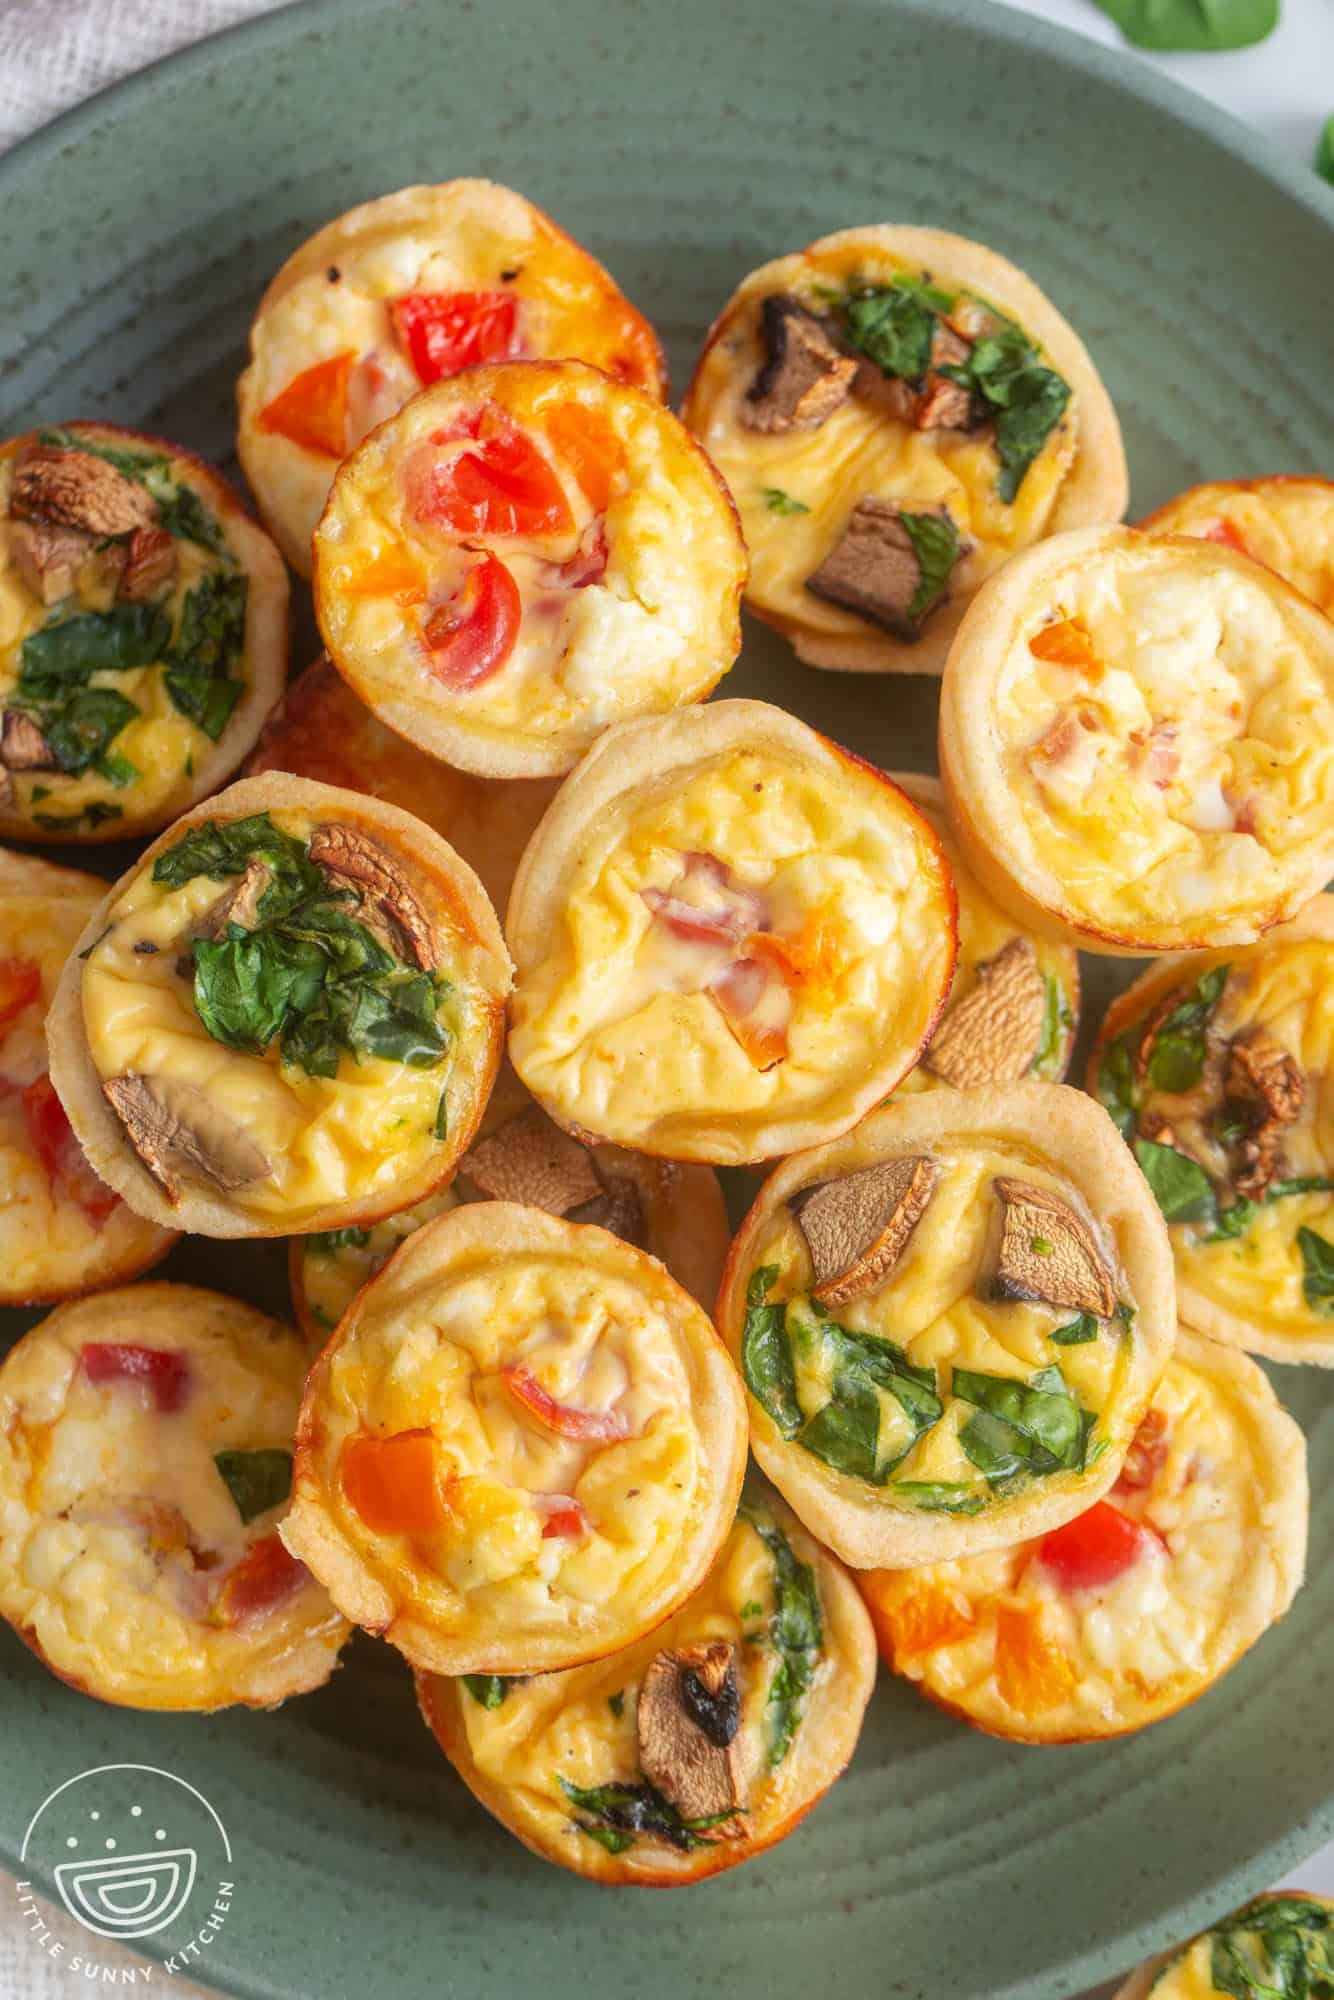 Mini quiche filled with veggies and cheese, stacked on a green plate, viewed from above.